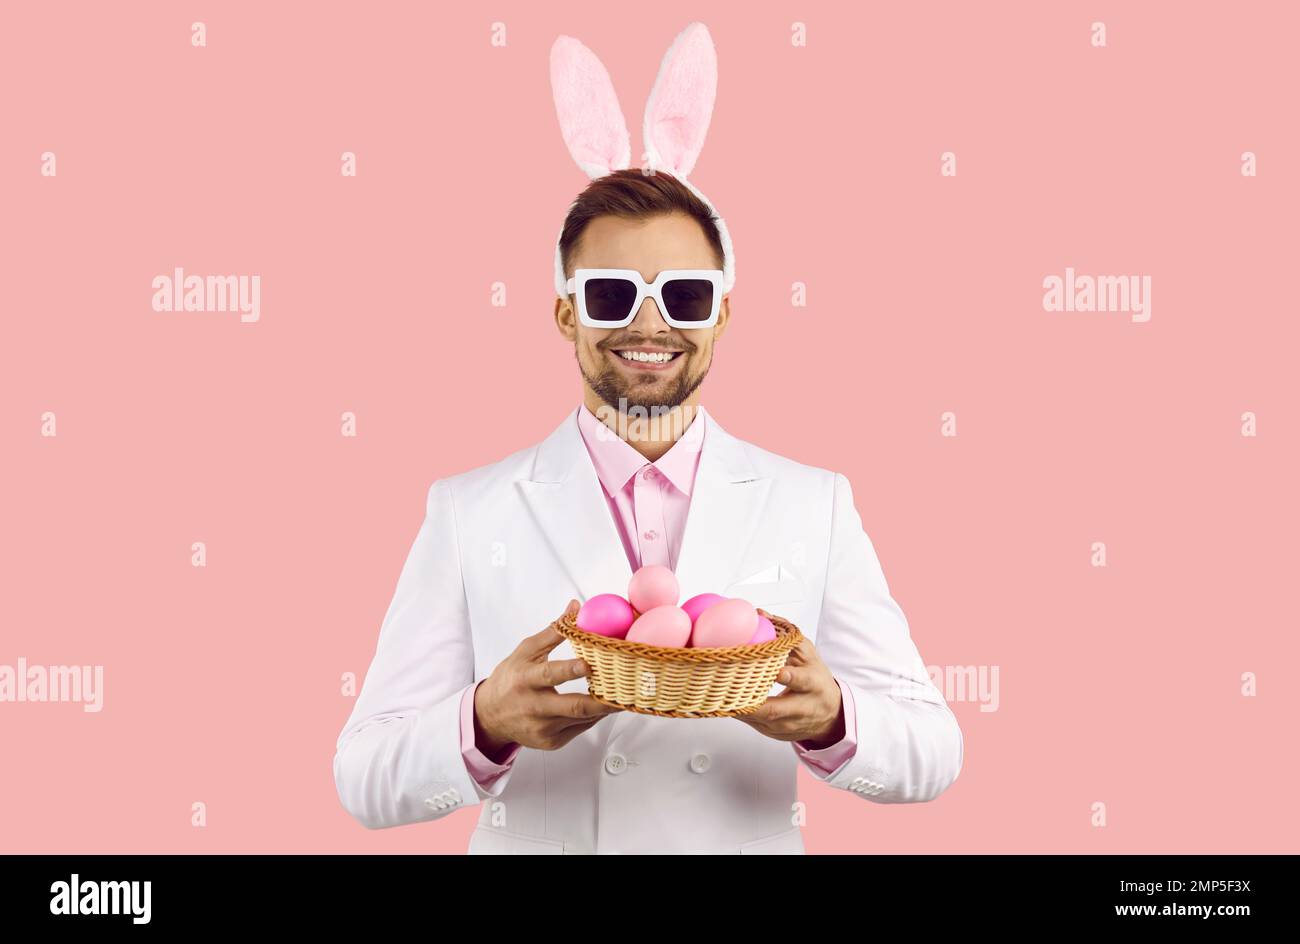 Smiling man with bunny ears hold basket with eggs Stock Photo